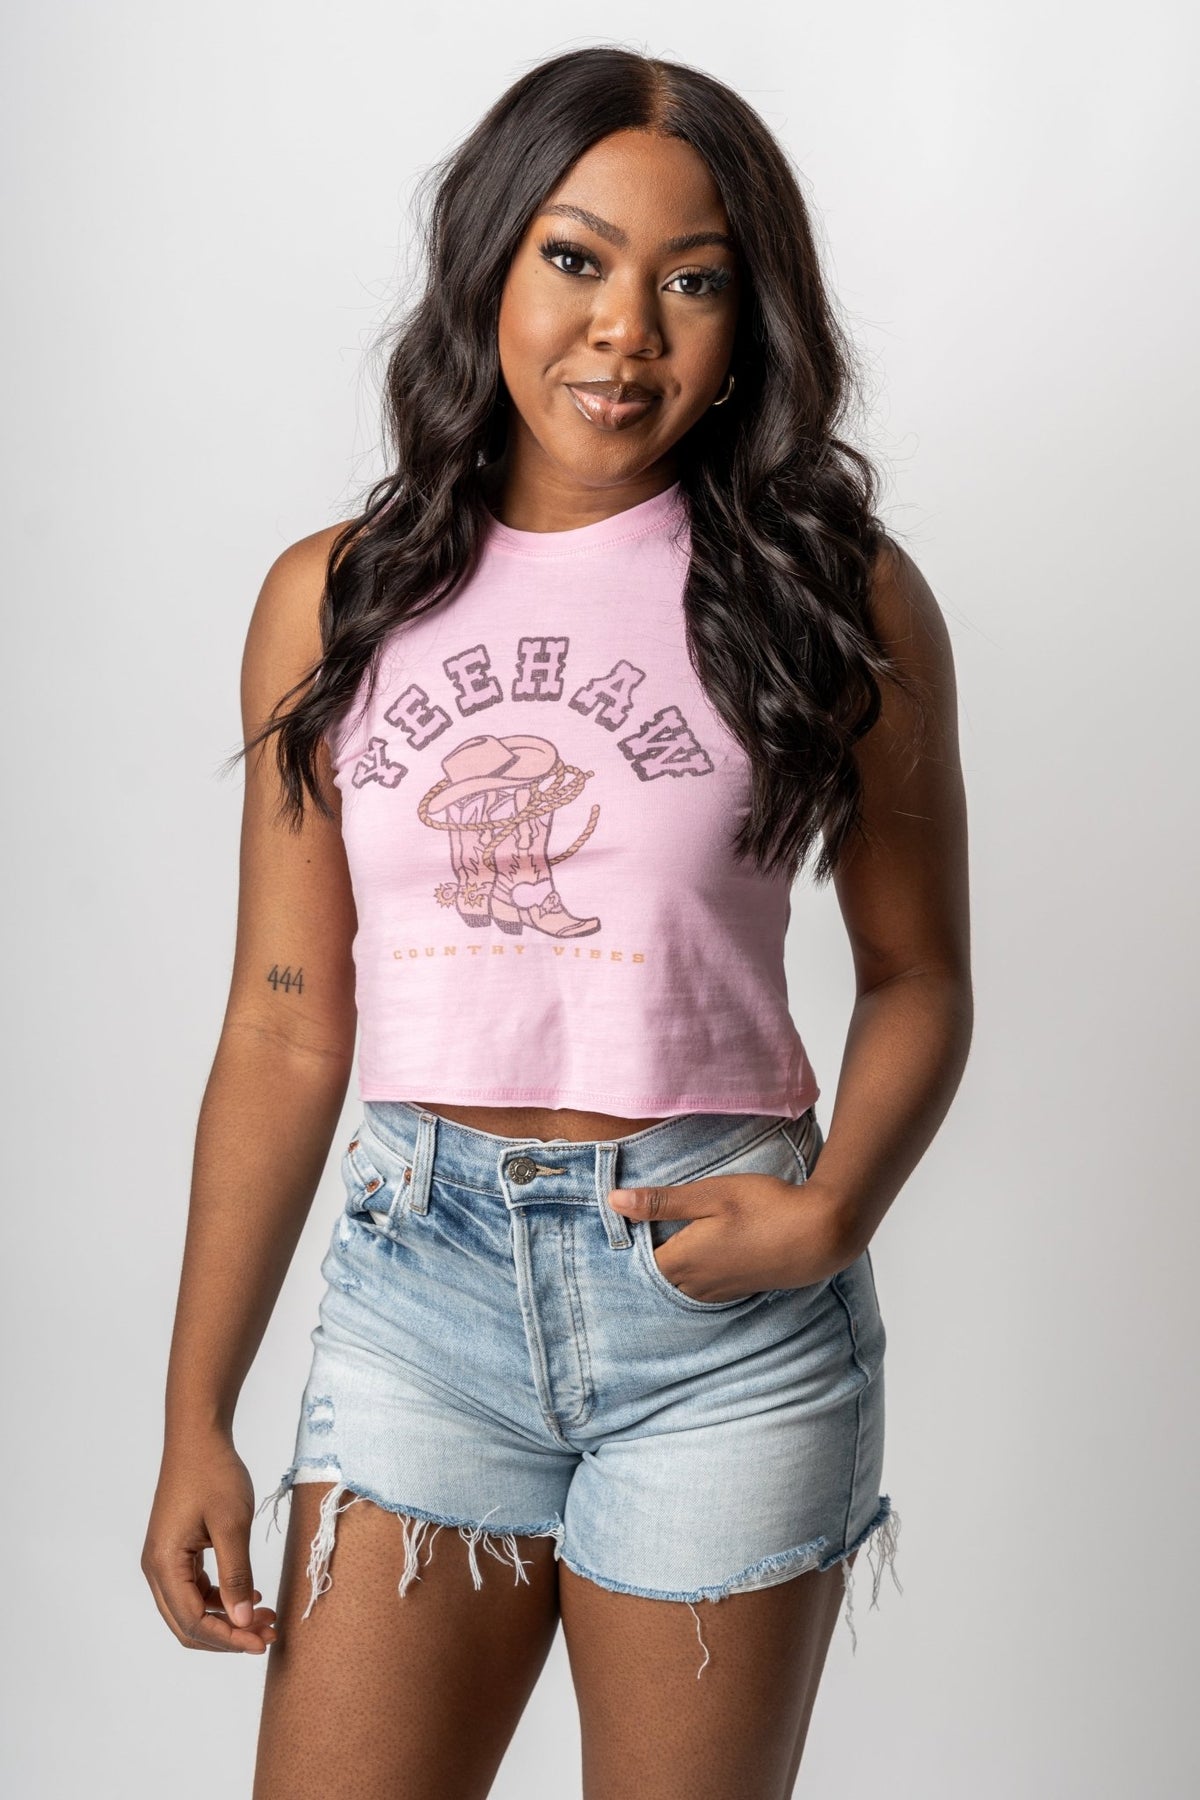 Yeehaw graphic crop tank top pink - Cute Tank Top - Trendy Tank Tops at Lush Fashion Lounge Boutique in Oklahoma City